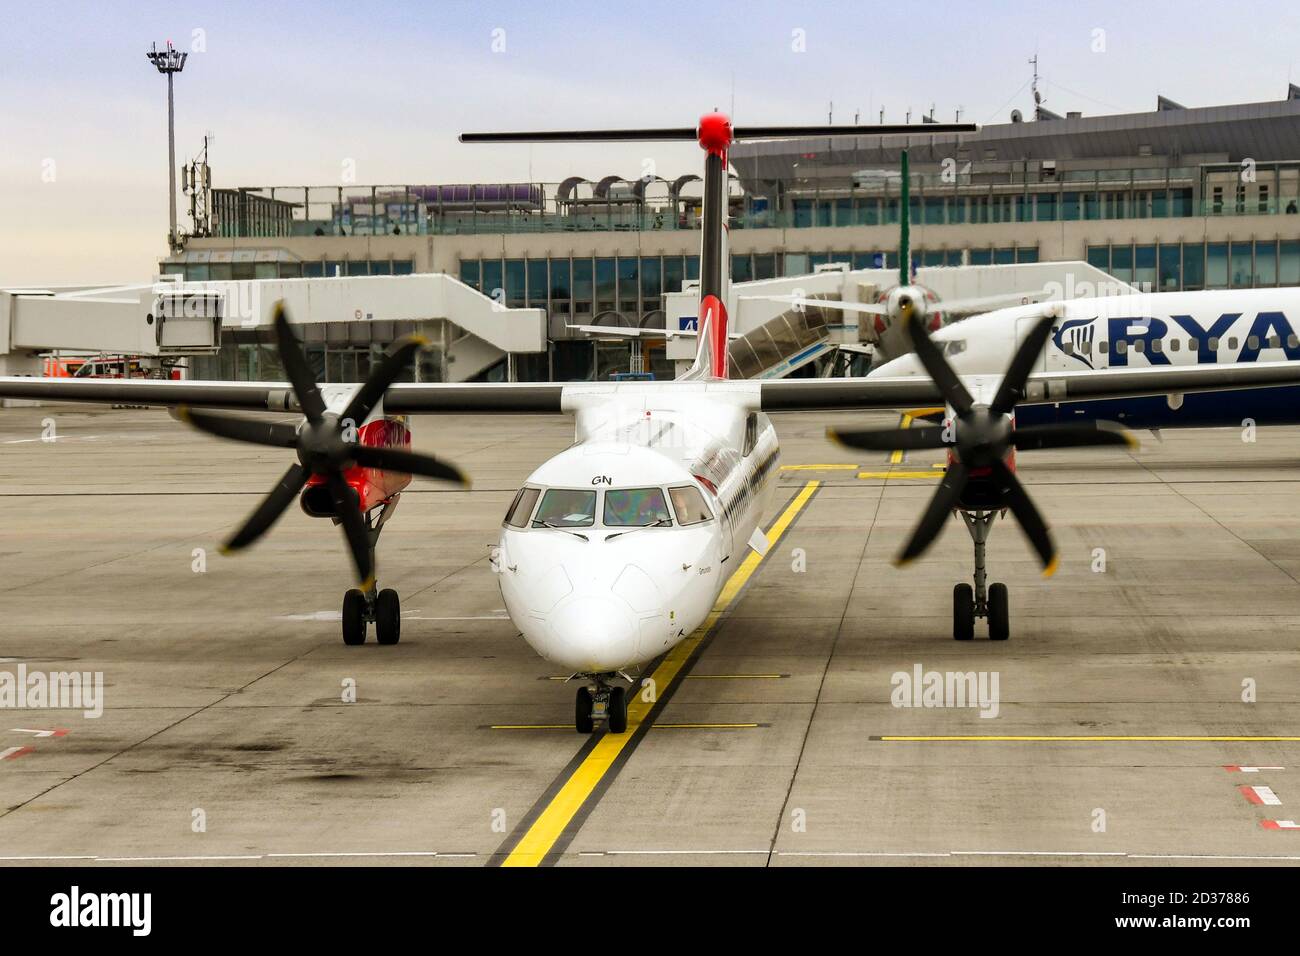 BUDAPEST, HUNGARY - MARCH 2019: Turboprop aircraft with engines running waiting to leave its stand at Budapest airport. Stock Photo